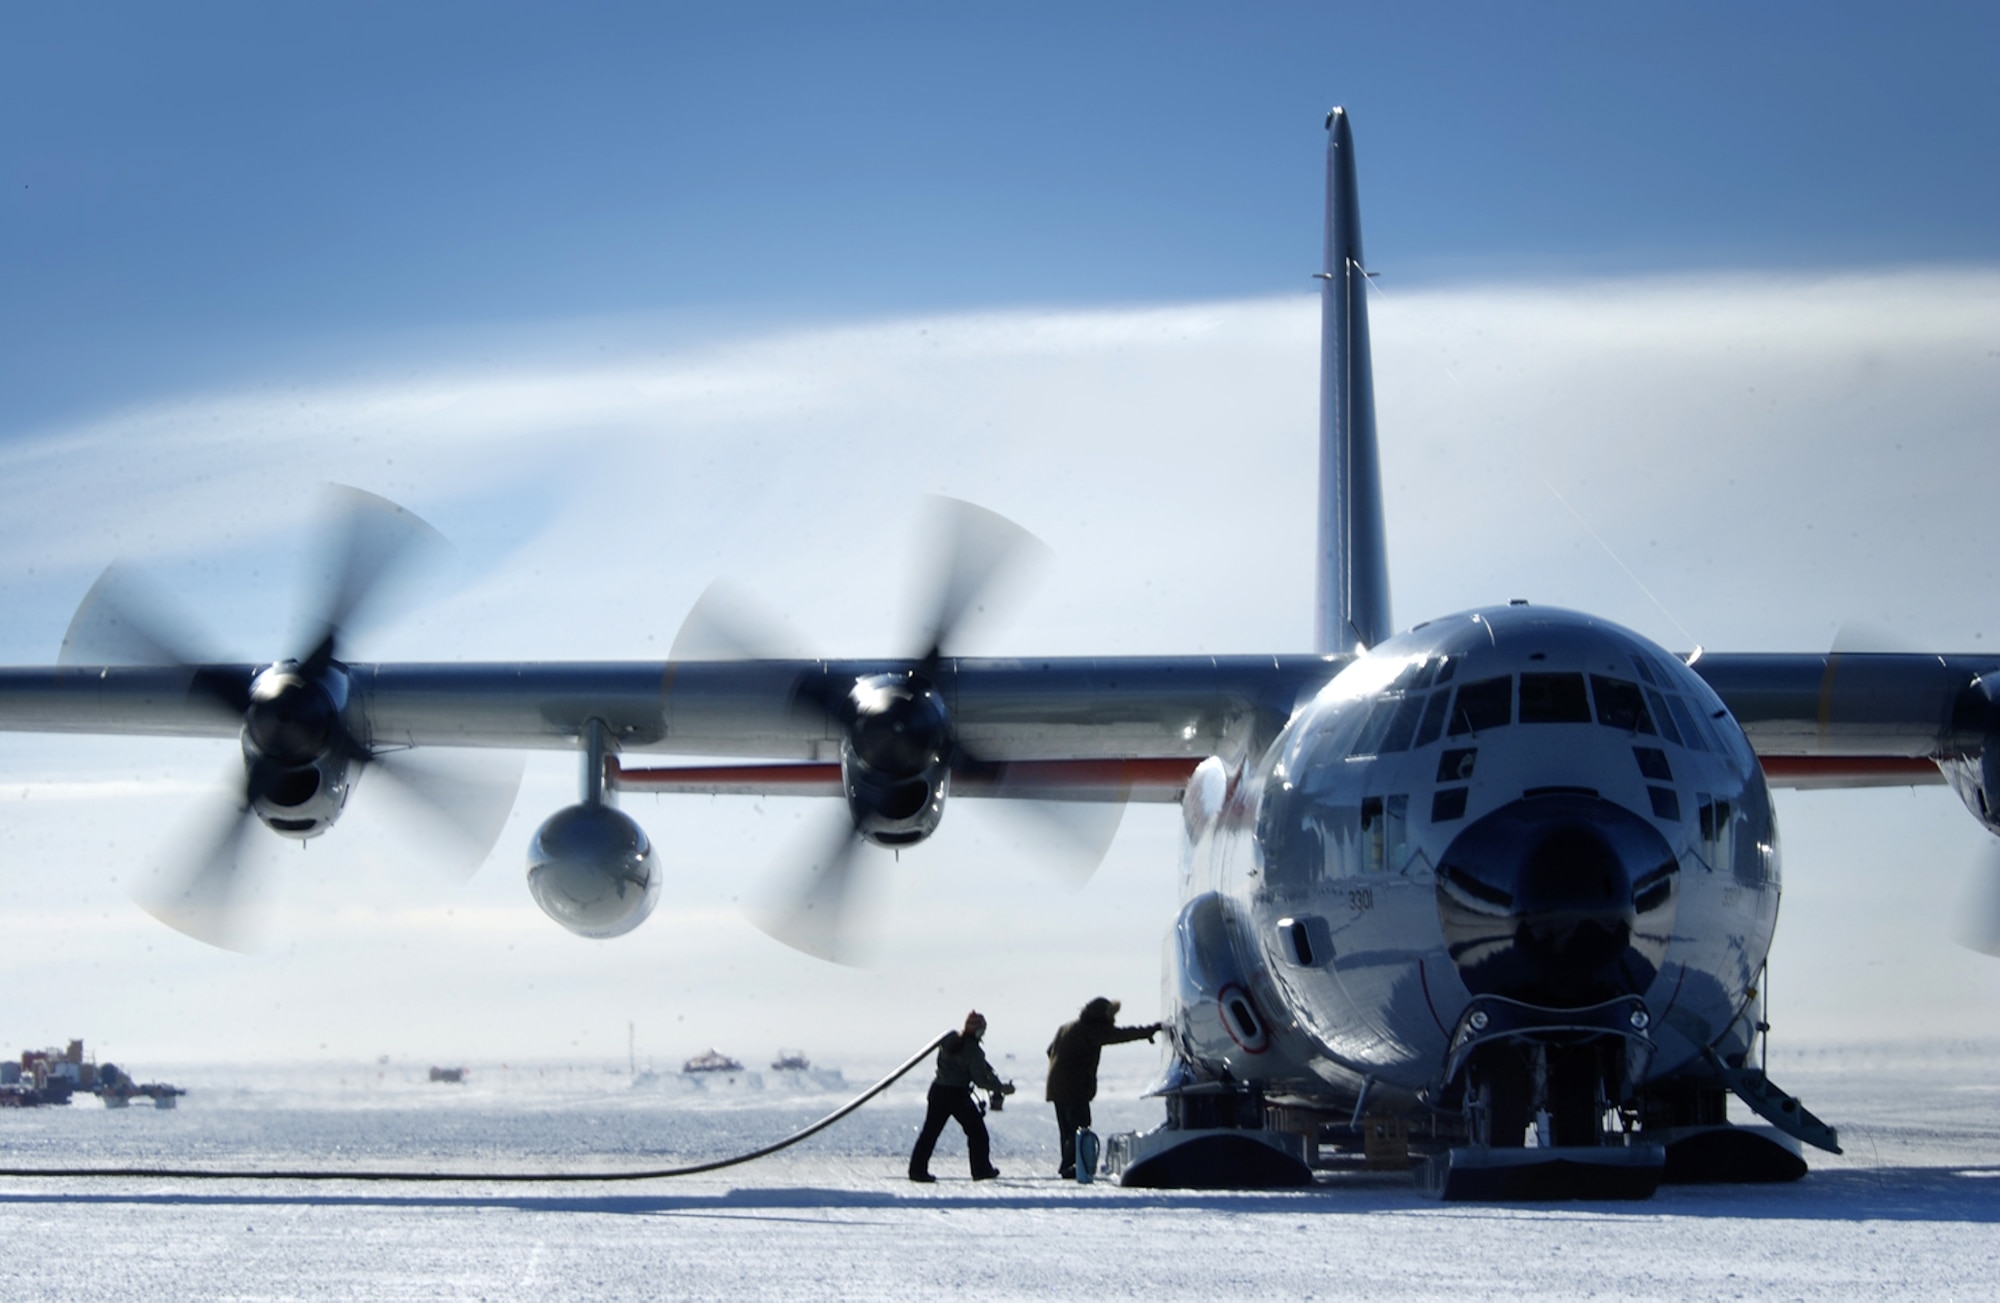 ADMUNSEN-SCOTT SOUTH POLE STATION, Antarctica -- An Air National Guard LC-130H Hercules sits while crews unload fuel and cargo here during a recent mission.  The LC-130H is equipped with ski-landing gear that allows the aircraft to land on ice or snow while airlifting supplies to remote locations throughout the Antarctic continent.  (U.S. Air Force photo by Master Sgt. Efrain Gonzalez)